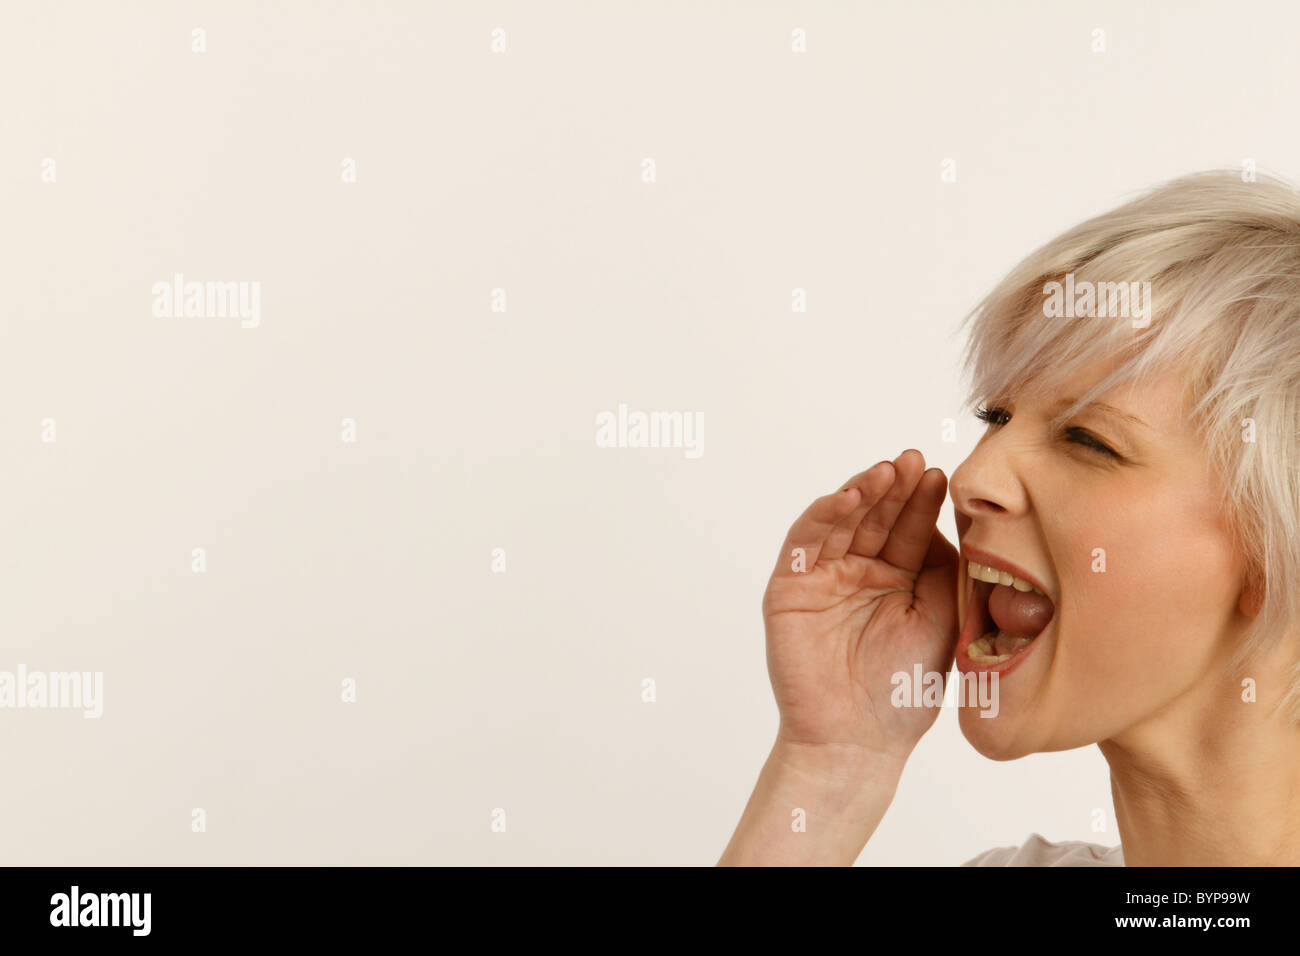 young woman shouting with her cupped hand to help with projection Stock Photo